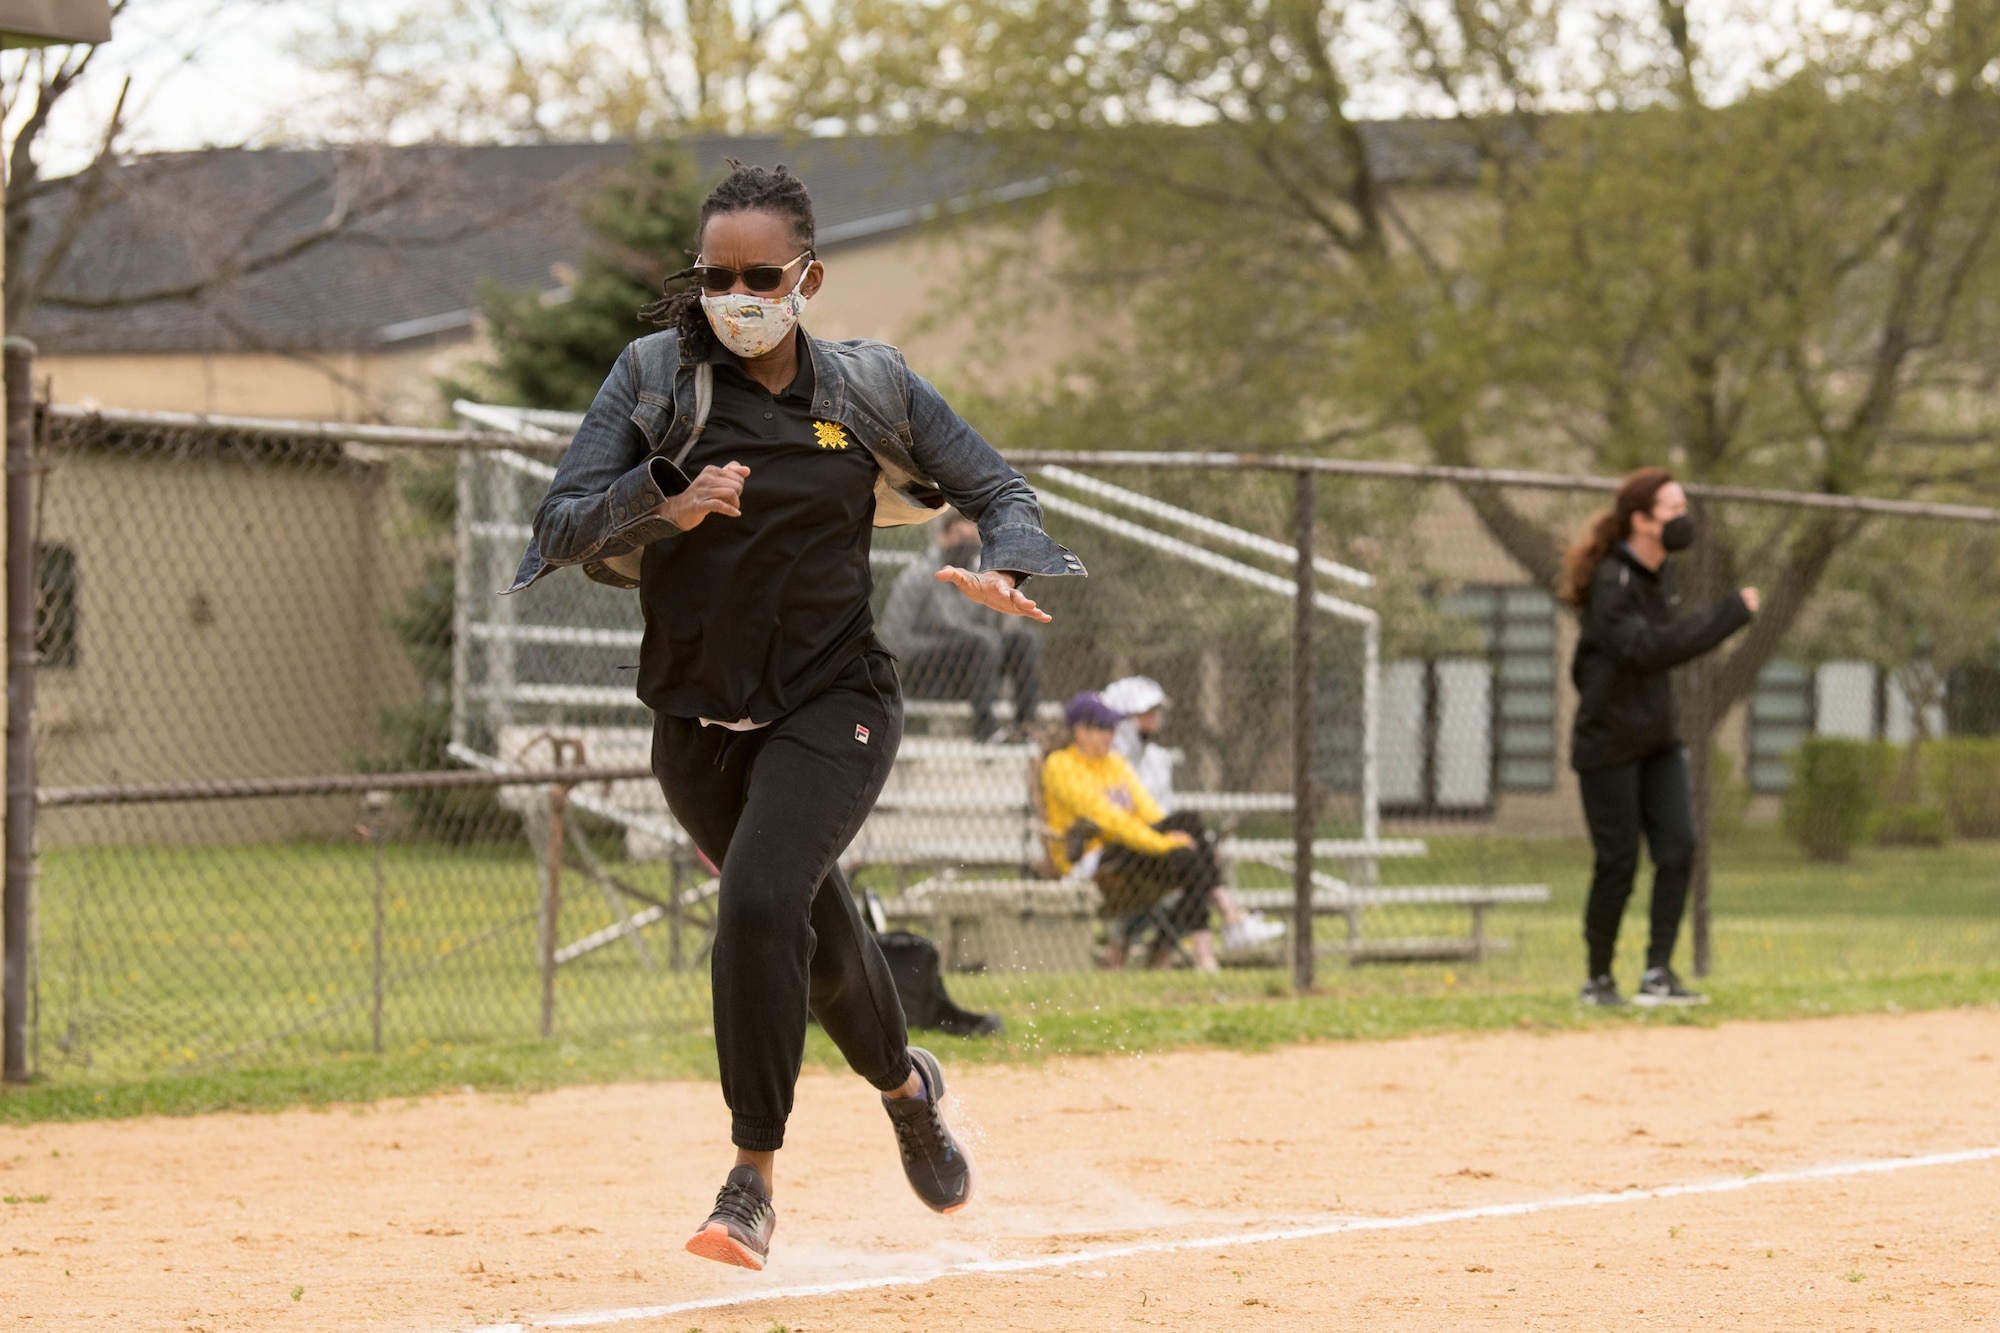 Col. Naomi Dennis, 436th Airlift Wing staff judge advocate, sprints home during a Colonels vs. Chiefs softball game at Dover Air Force Base, Delaware, April 16, 2021. The Chiefs won the game 15-6. (U.S. Air Force photo by Mauricio Campino)